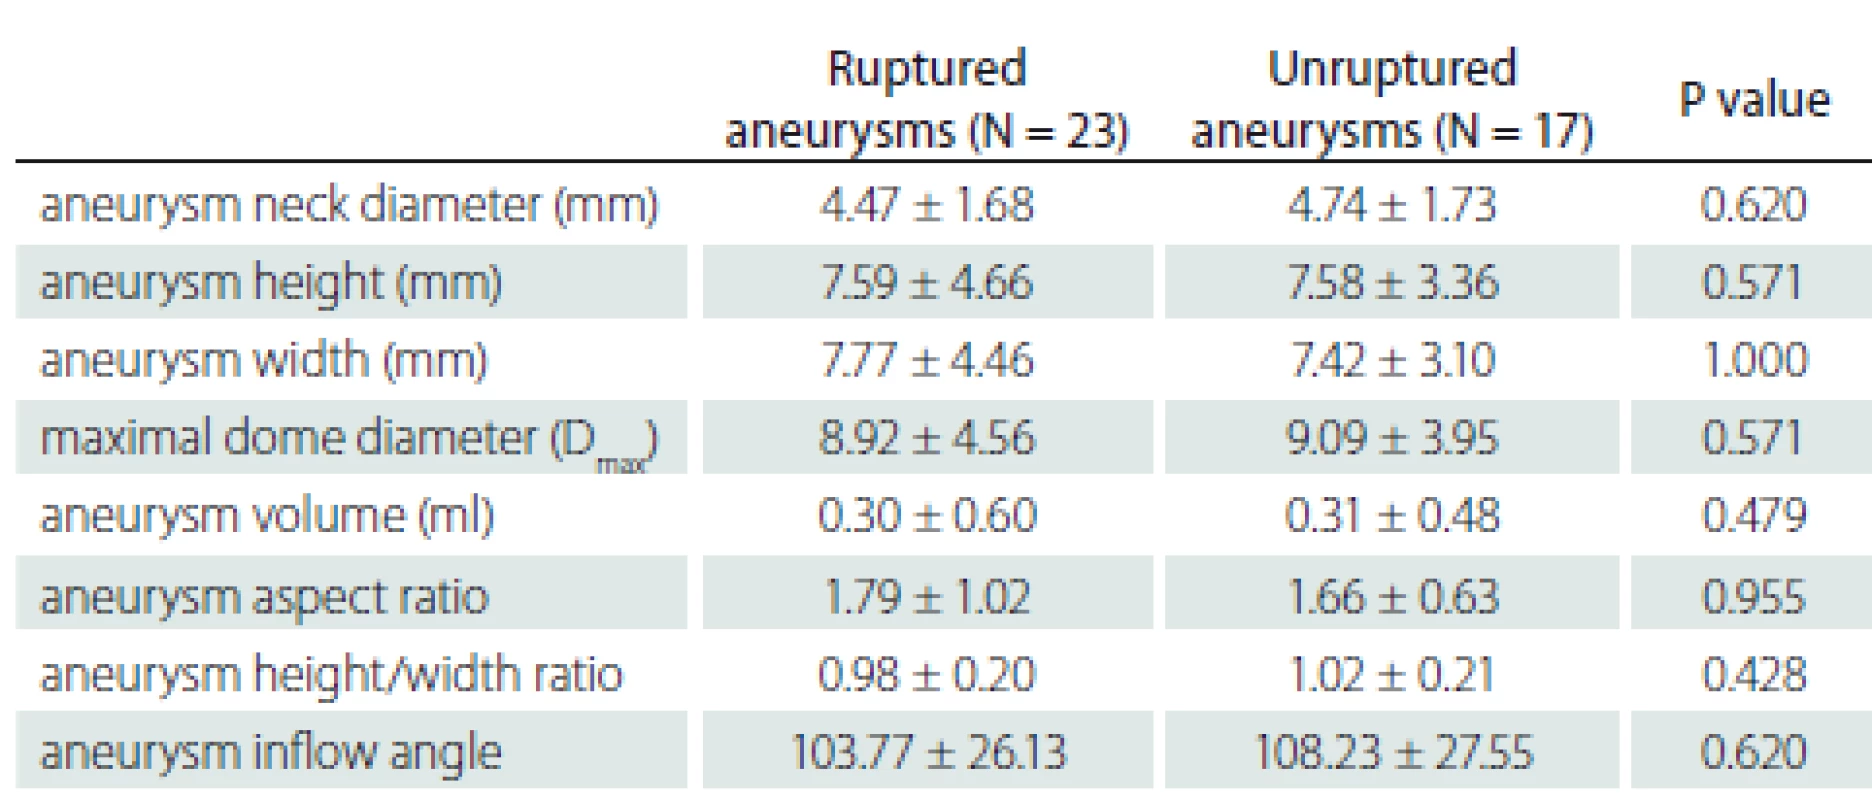 Evaluation of rupture status according to the morphological characteristics
of the aneurysm.